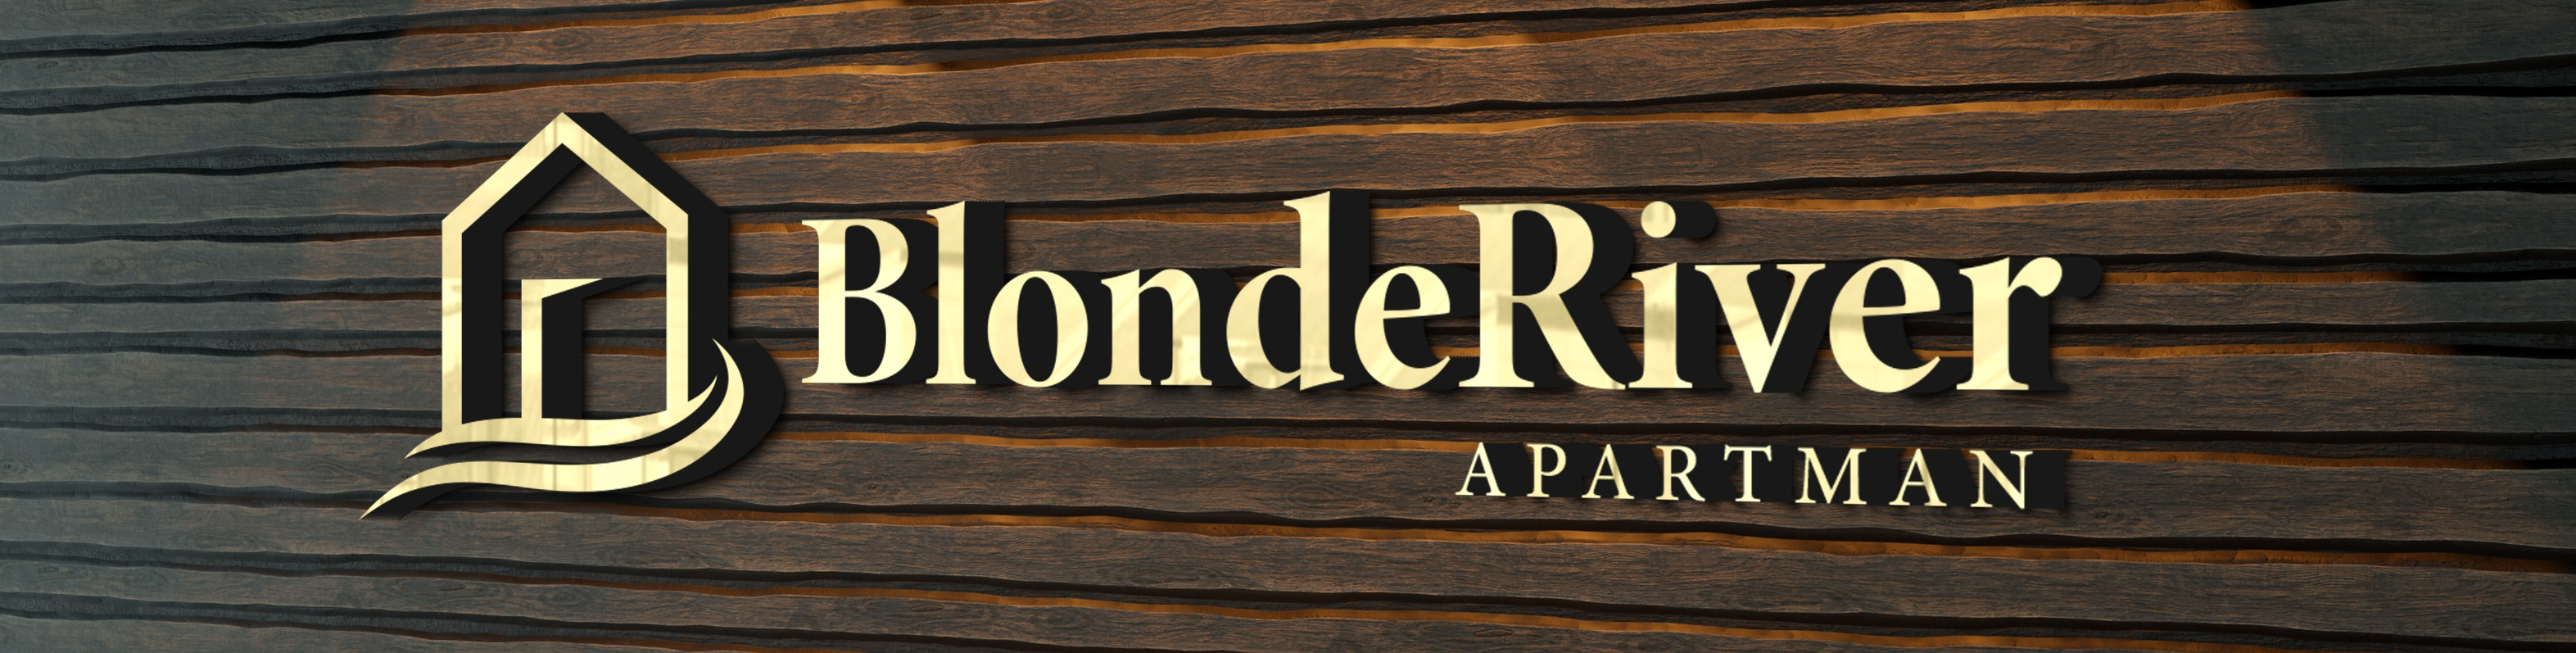 The logo and image of the Blonde River Apartment. Click here to go to the main page.